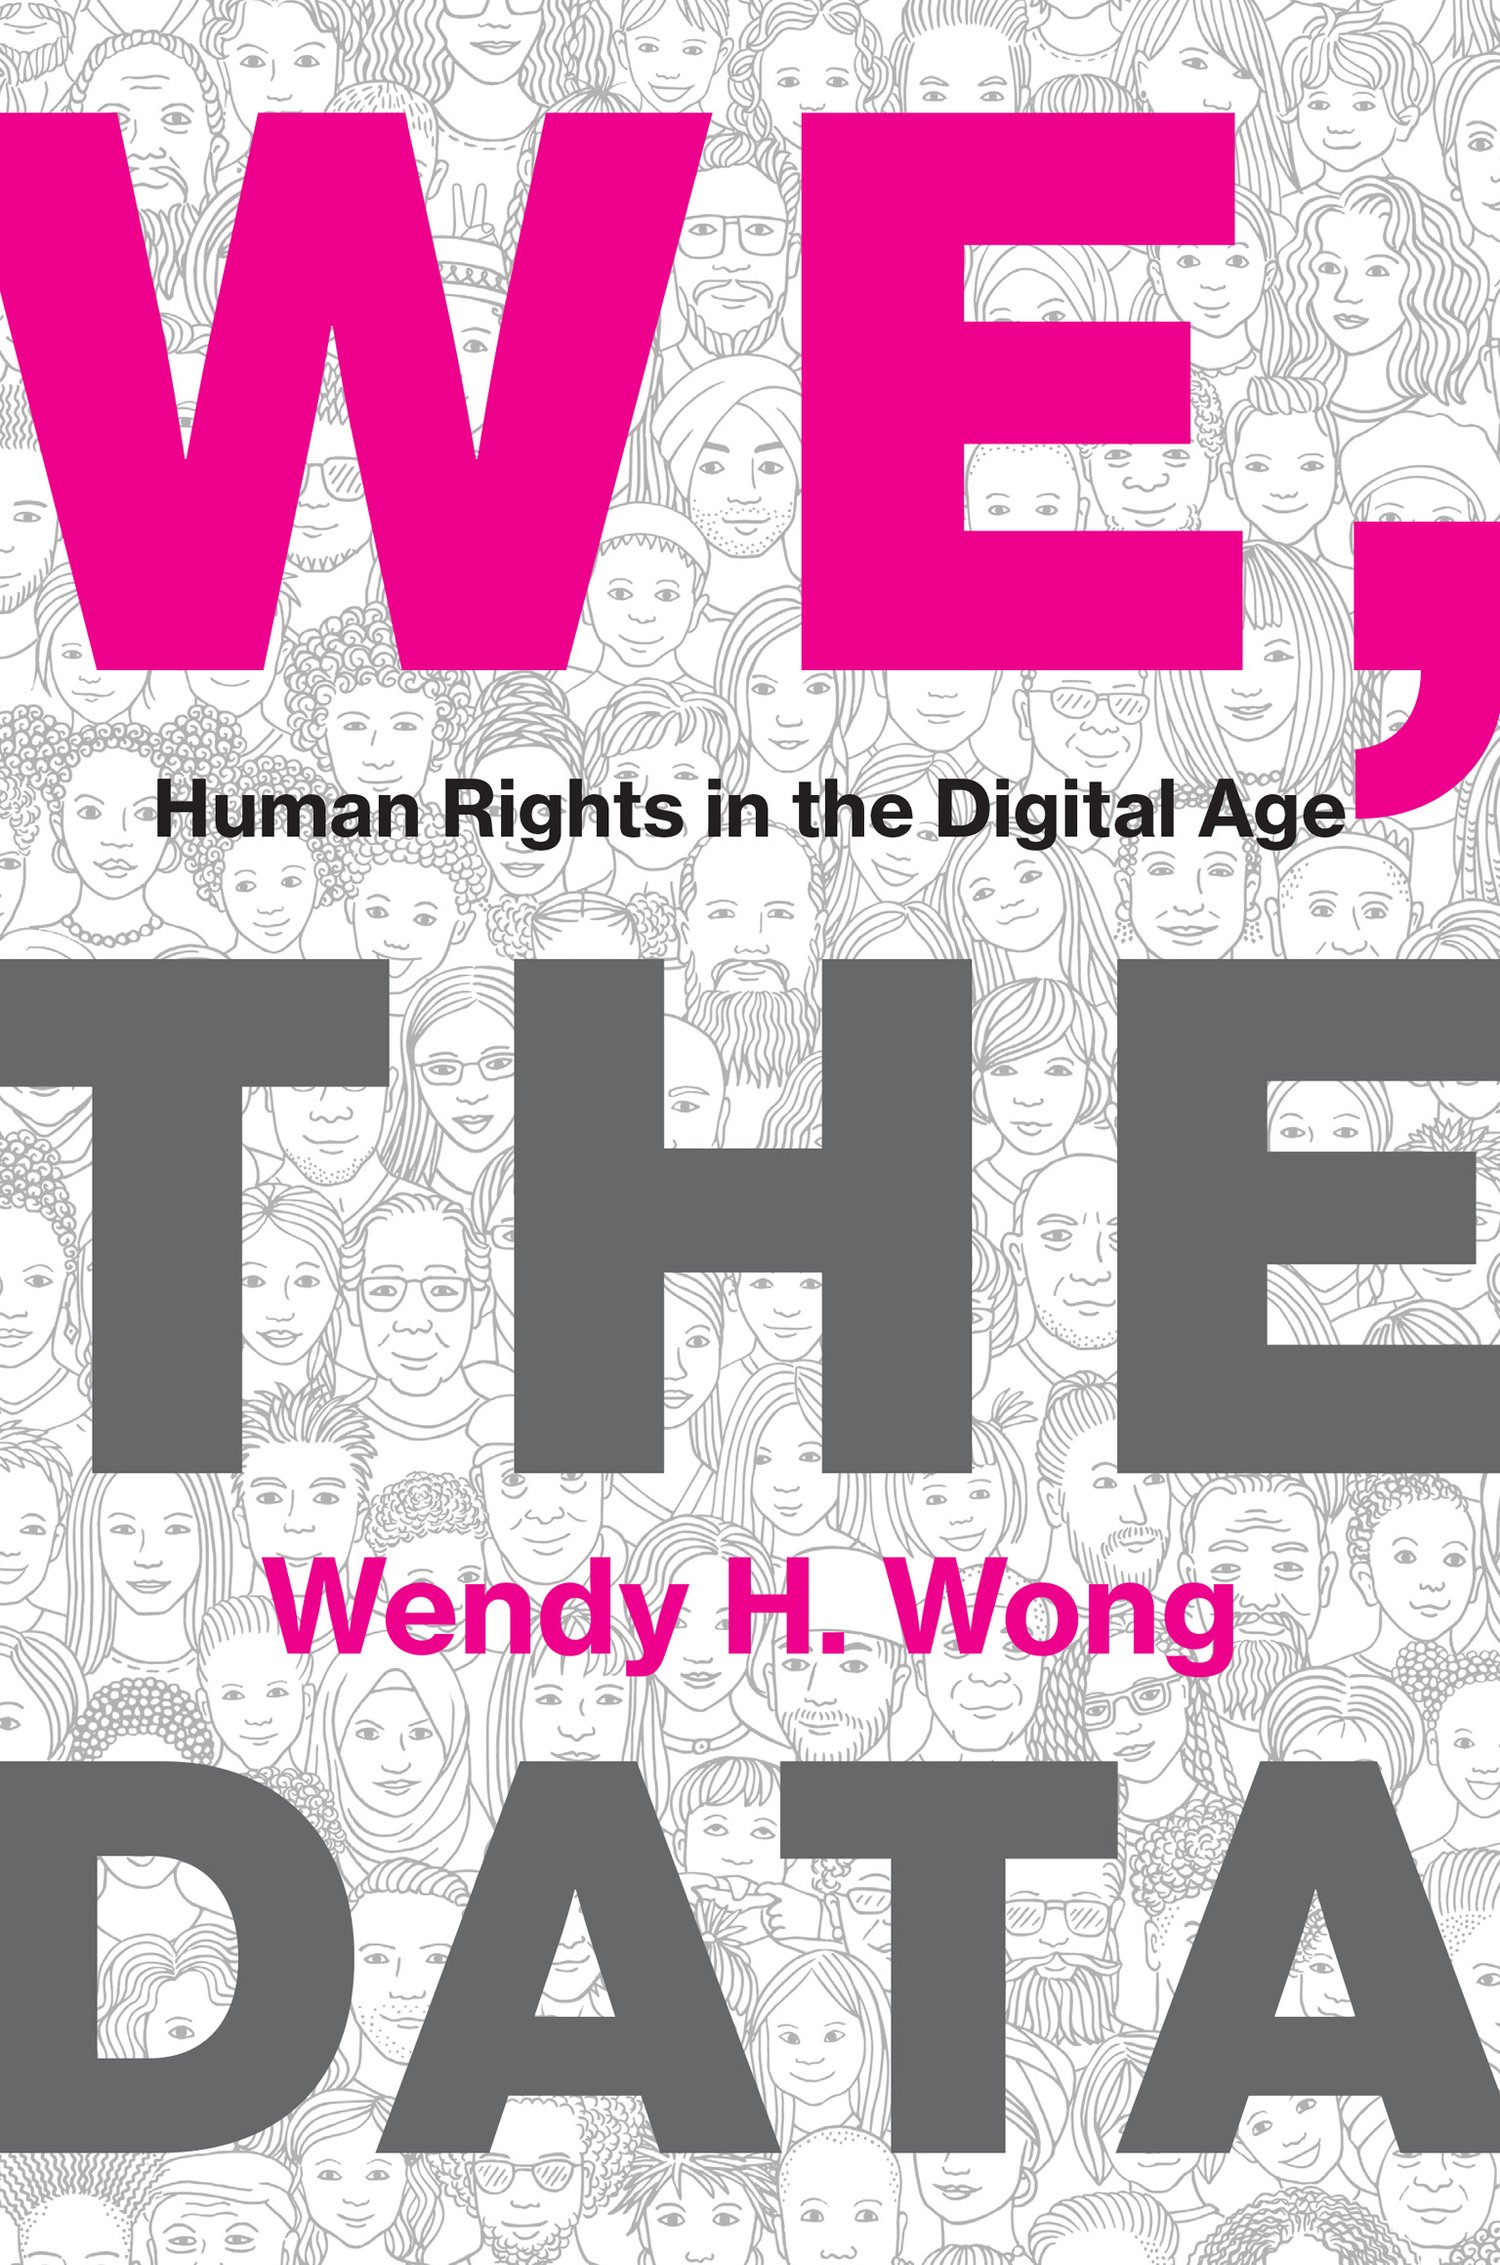 Book cover with title: 'We the Data' with doodle images of many people on cover